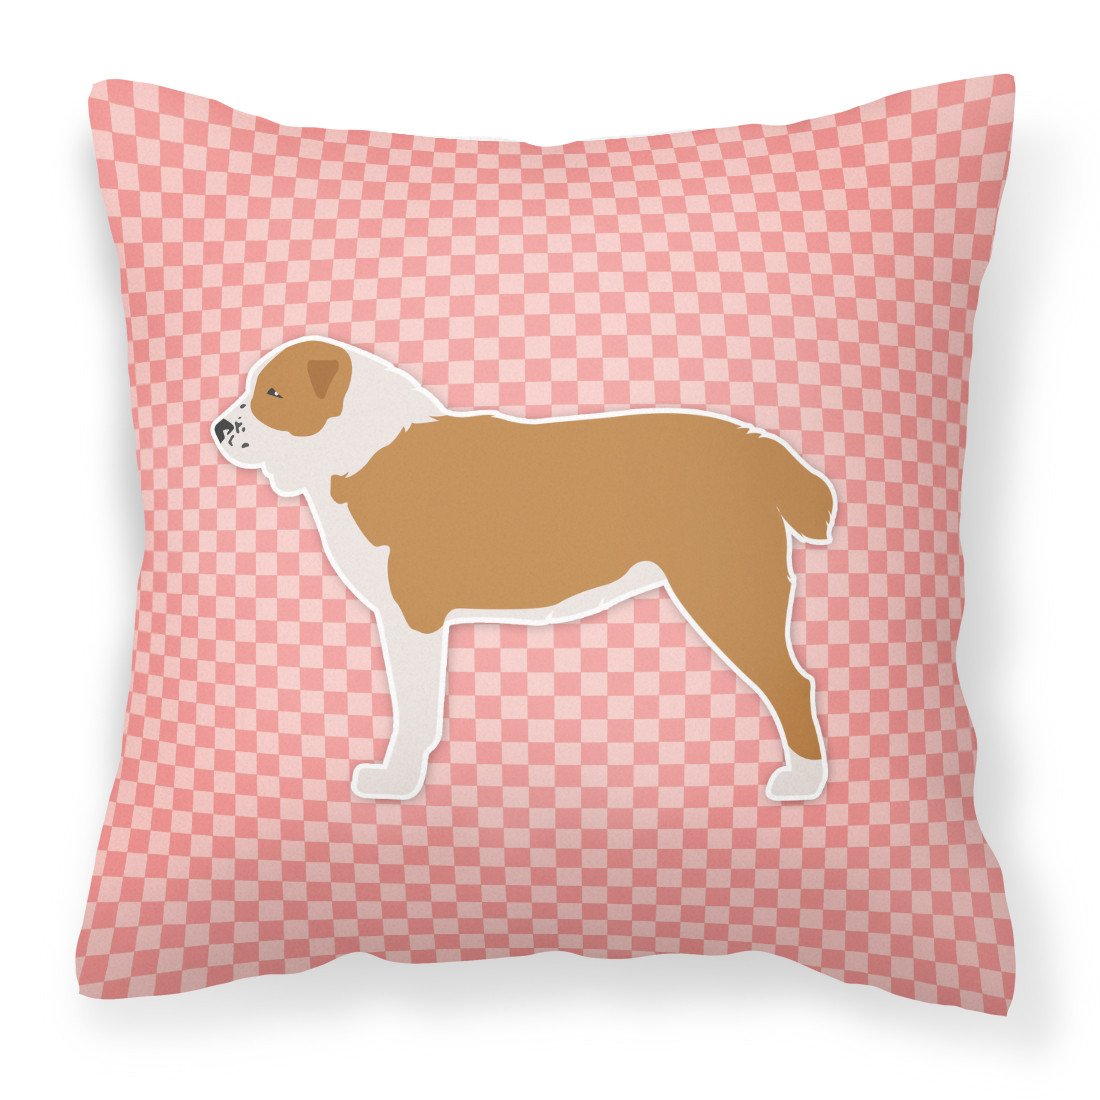 Central Asian Shepherd Dog Checkerboard Pink Fabric Decorative Pillow BB3628PW1818 by Caroline's Treasures